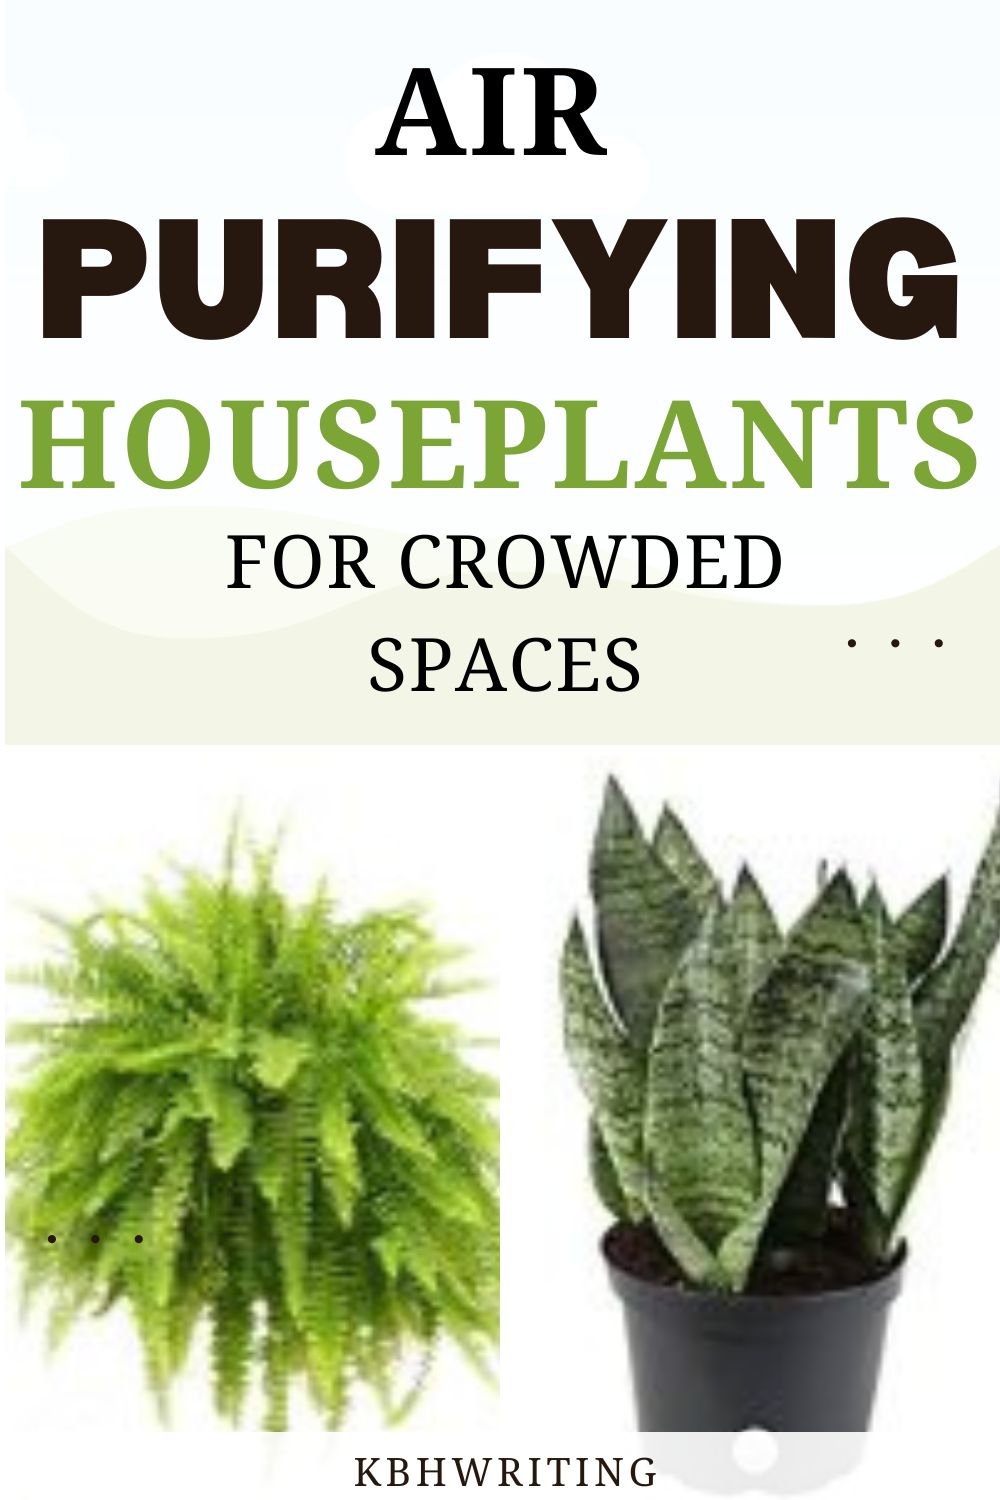 Best Air Purifying Plants For Overcrowded Spaces.